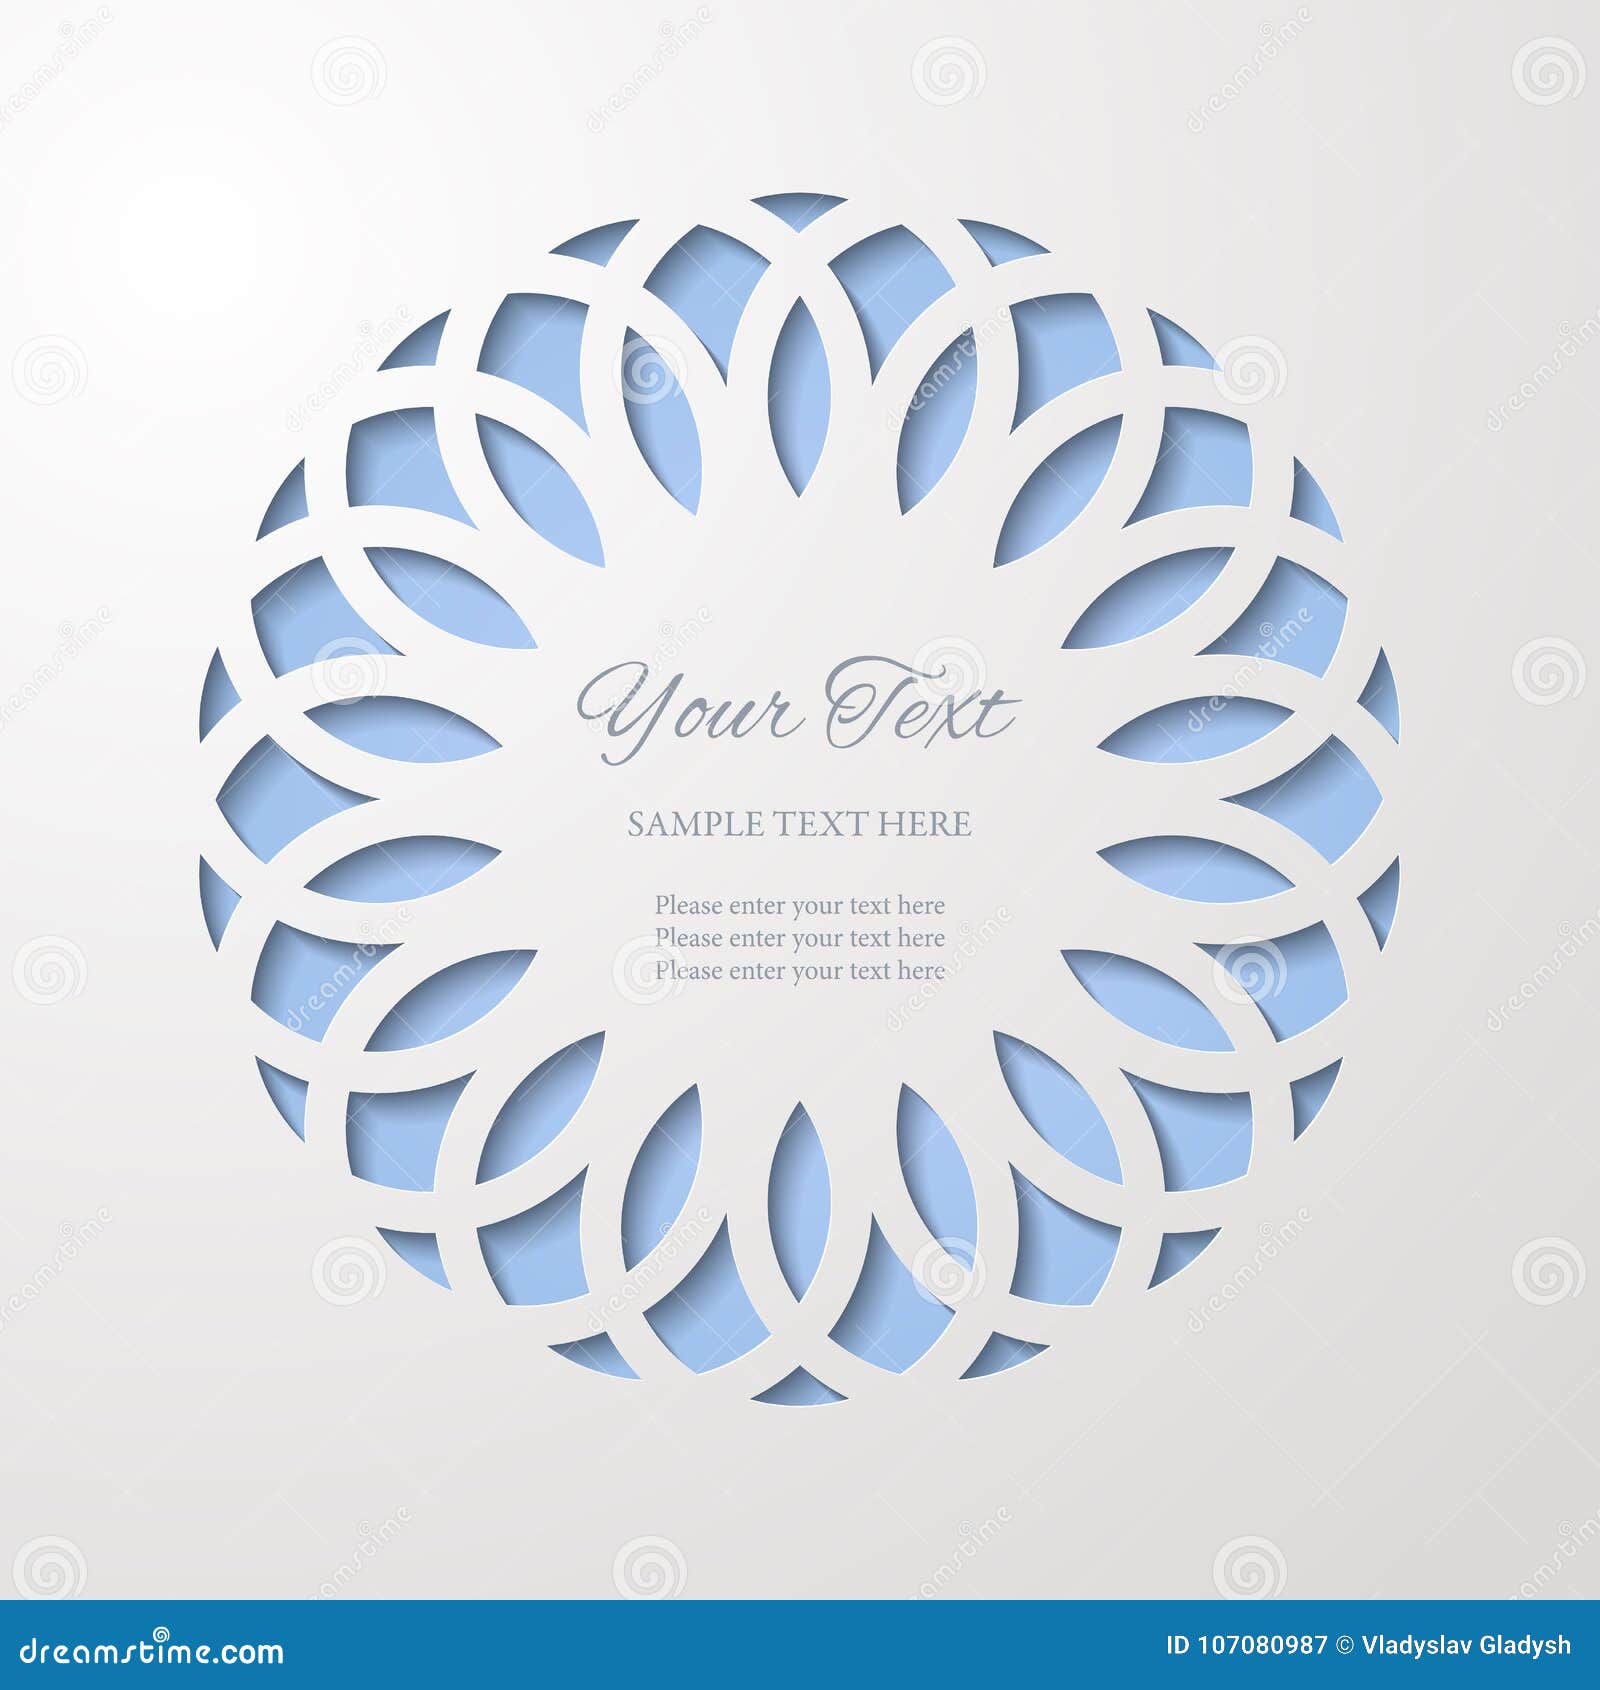 Round Lace Cutout Frame With Shadow On Blue Background Paper Cut 3d Ornamental Border Stock Vector Illustration Of Birthday Layout 107080987,Traditional Living Room Designs Indian Style